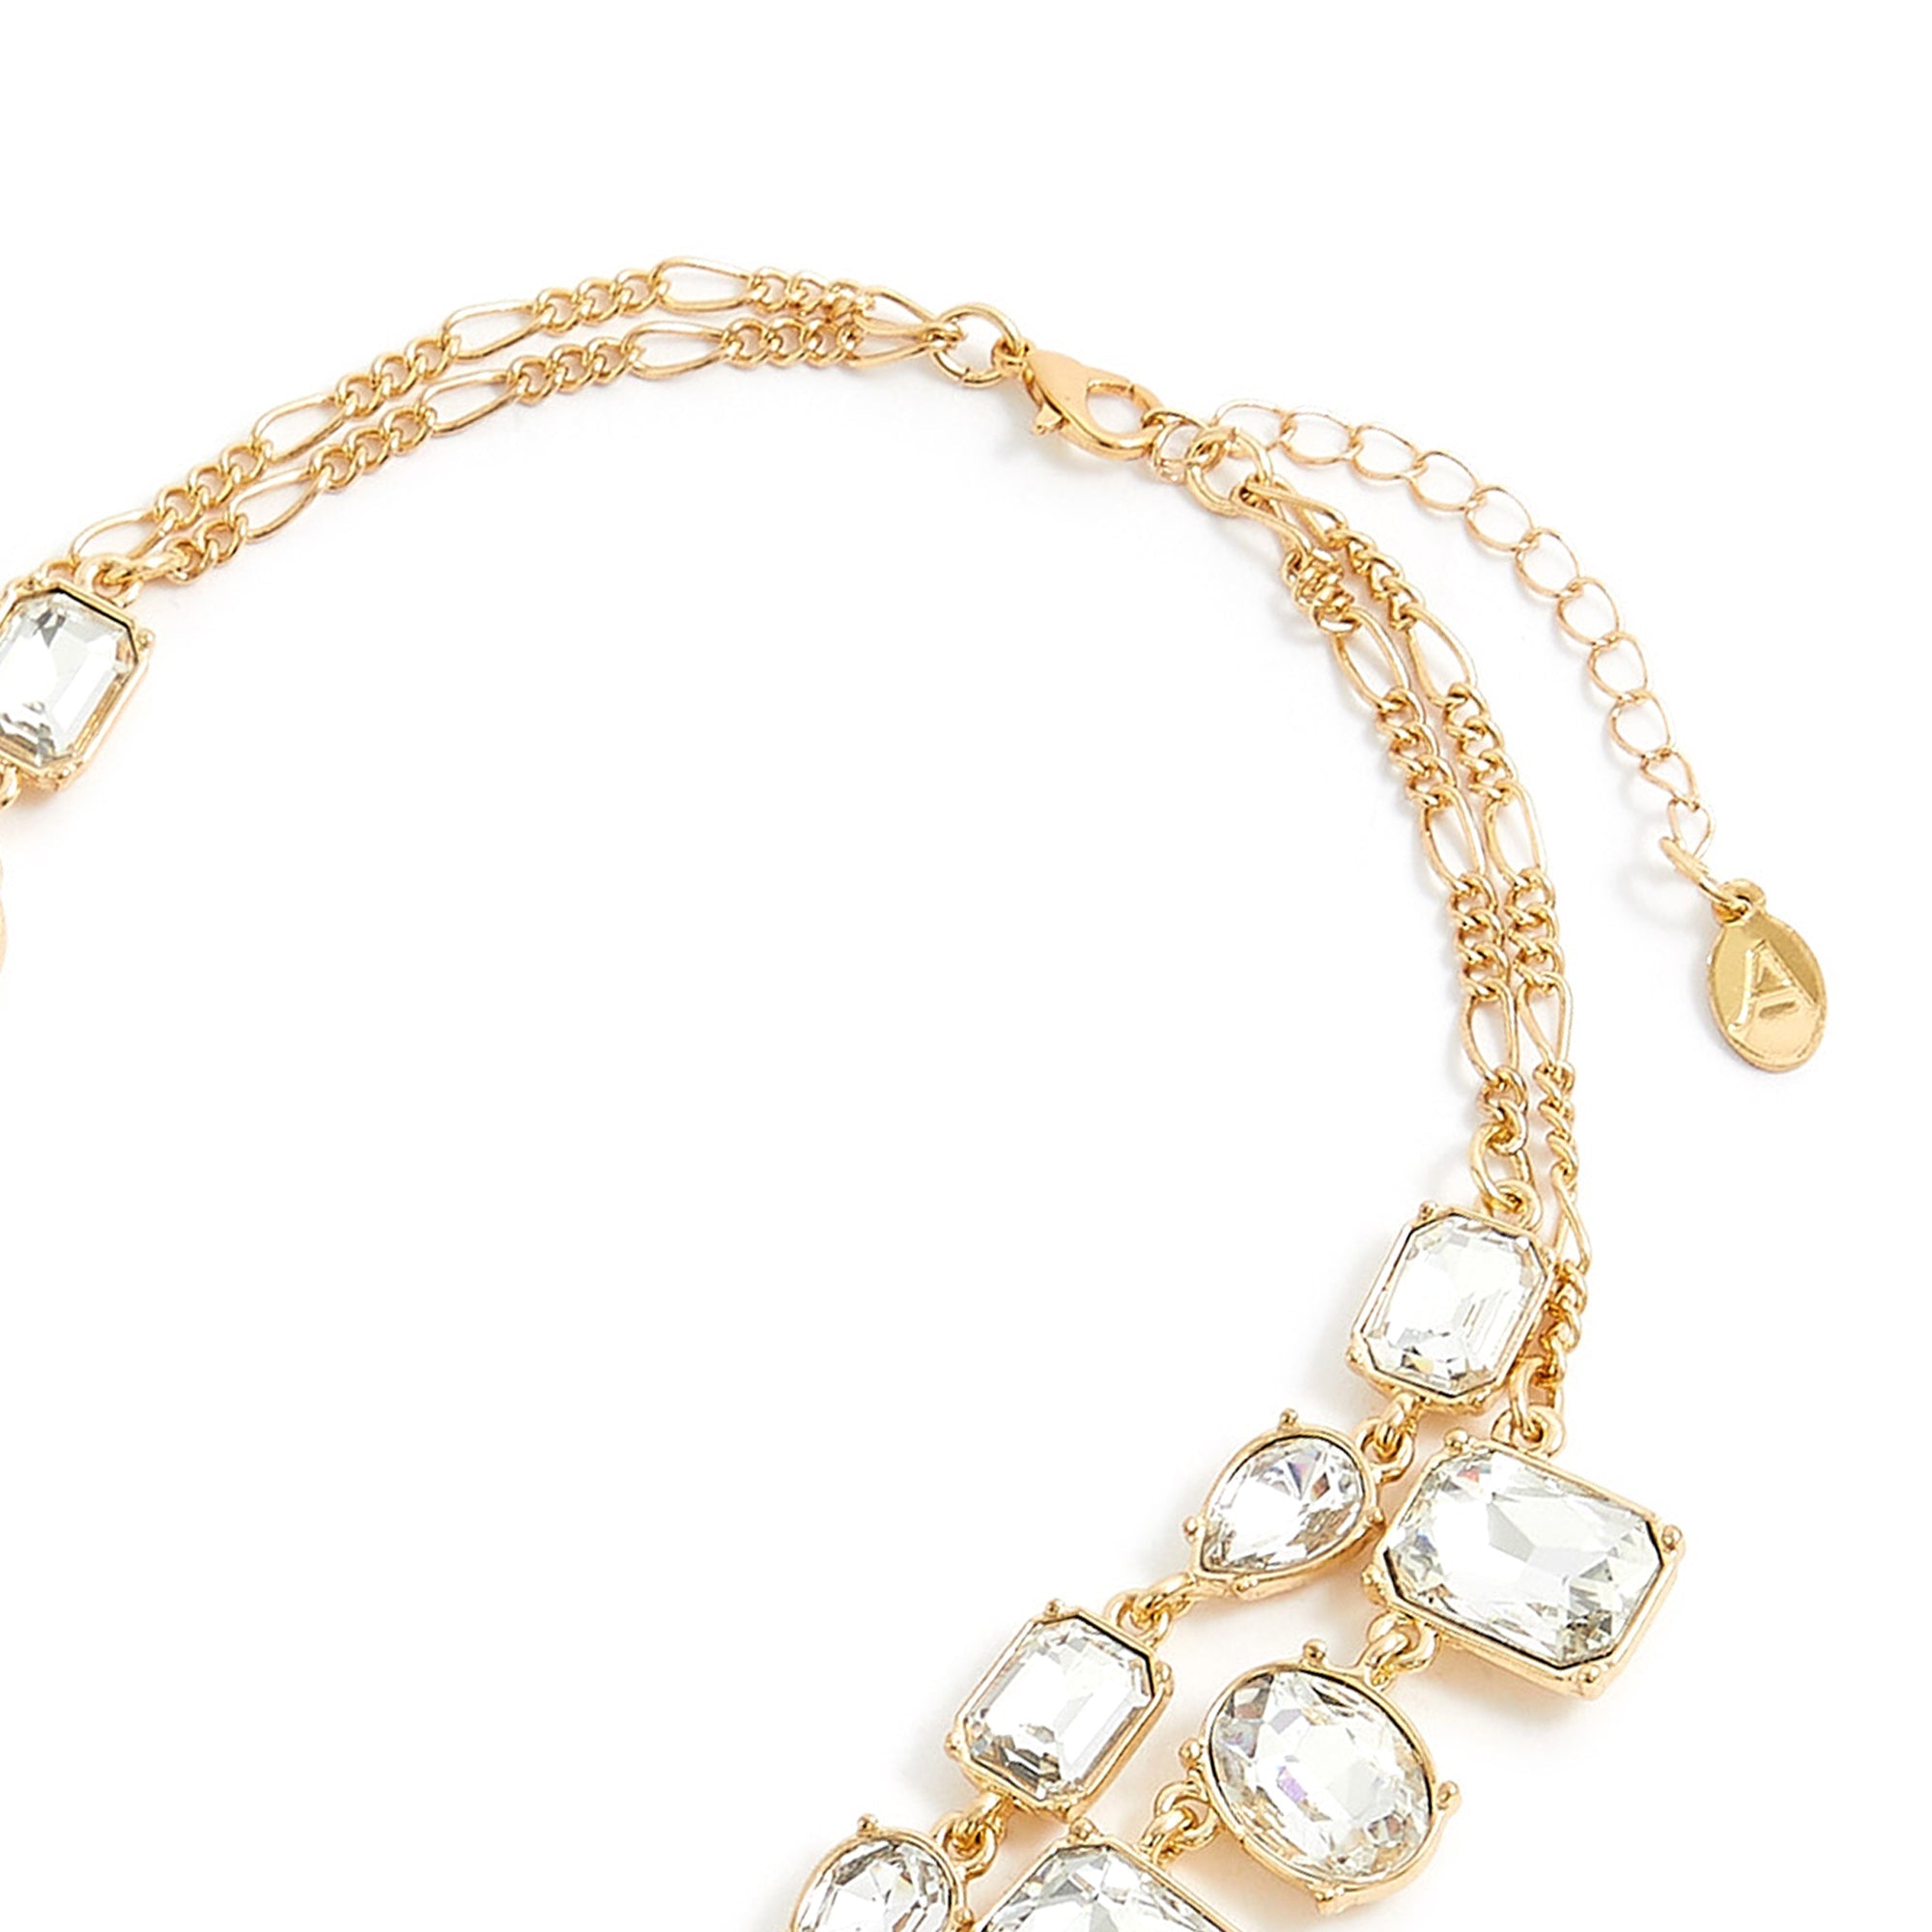 Accessorize London Women's Gold layered Crystal Statement Necklace